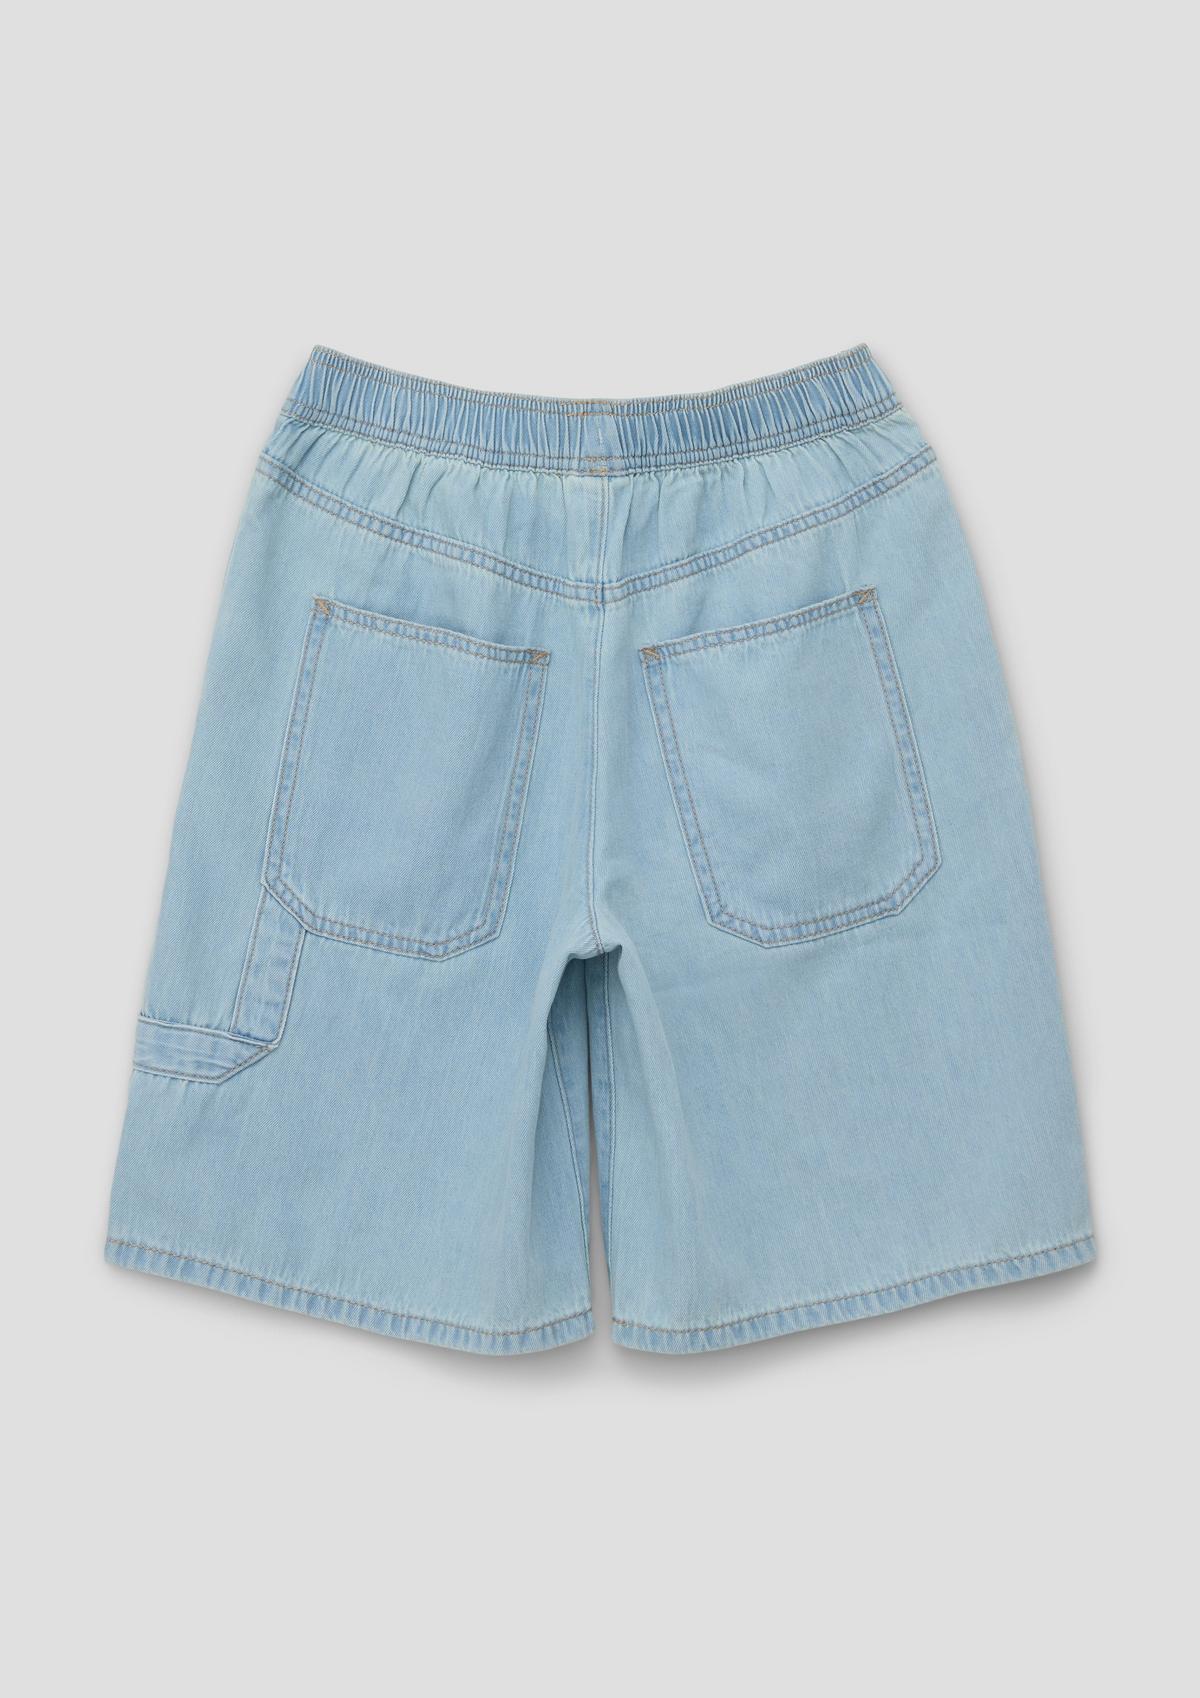 s.Oliver Denim Bermudas / relaxed fit / mid rise